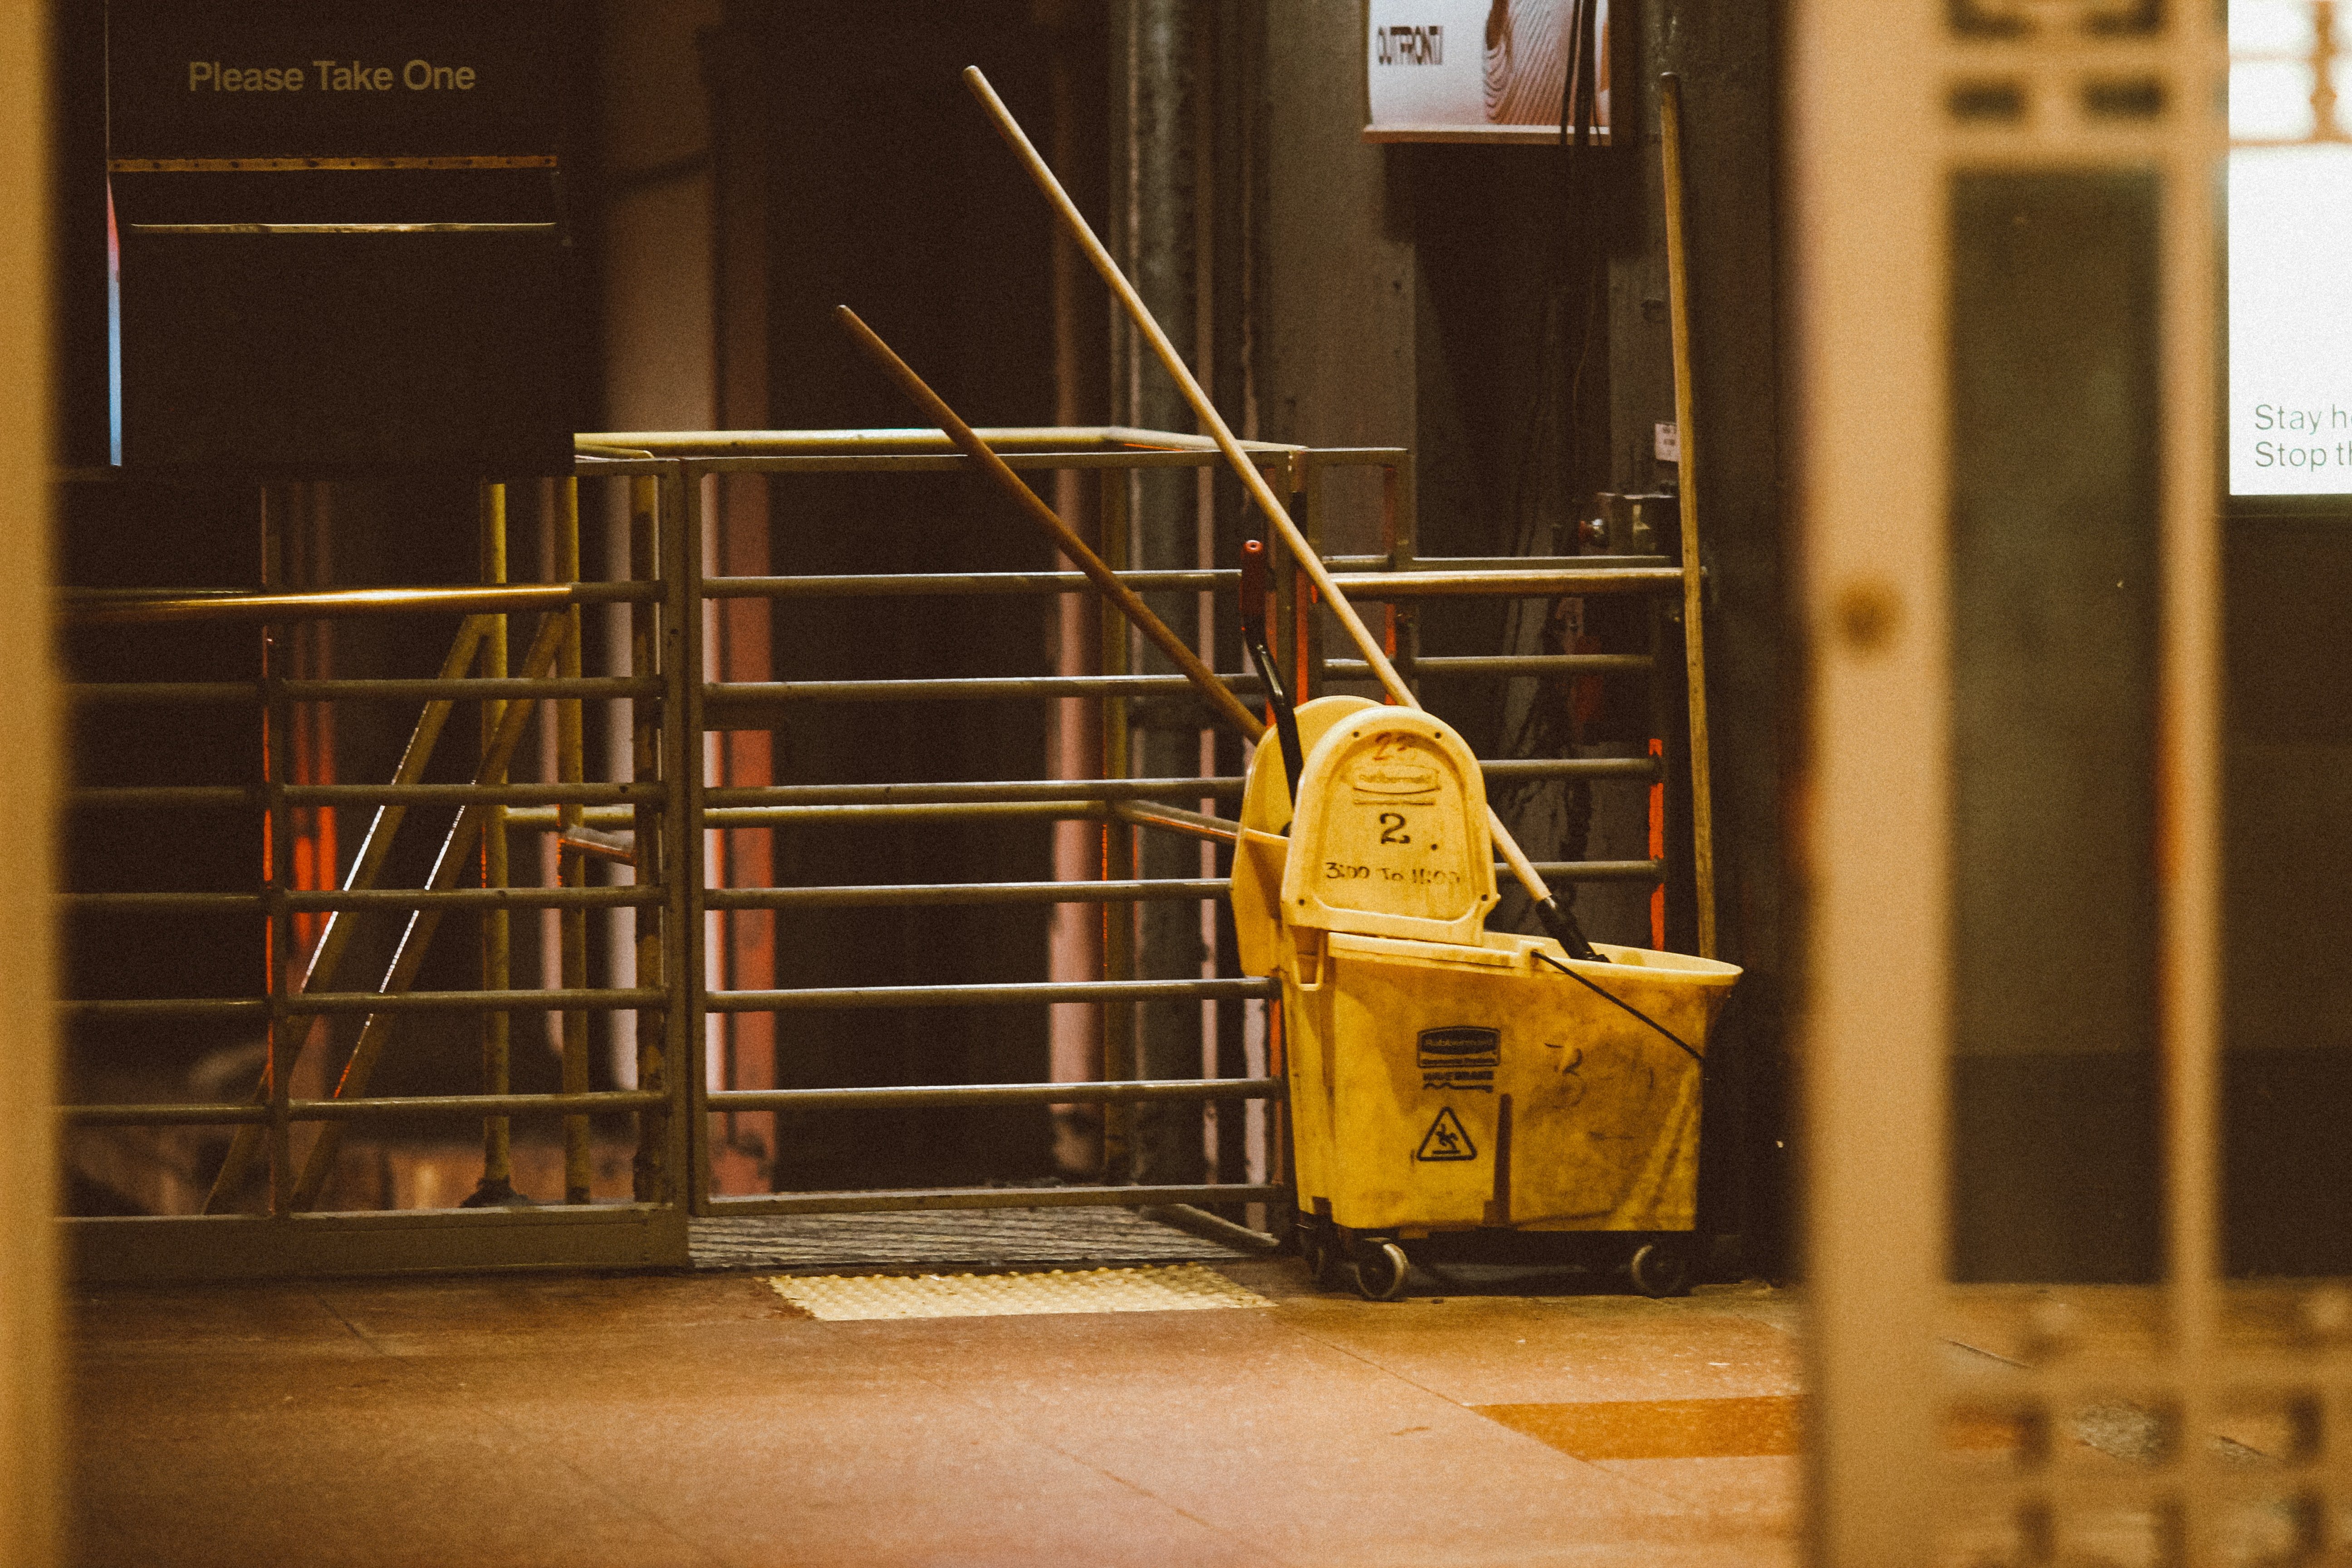 Martha started working as a janitor | Photo: Unsplash